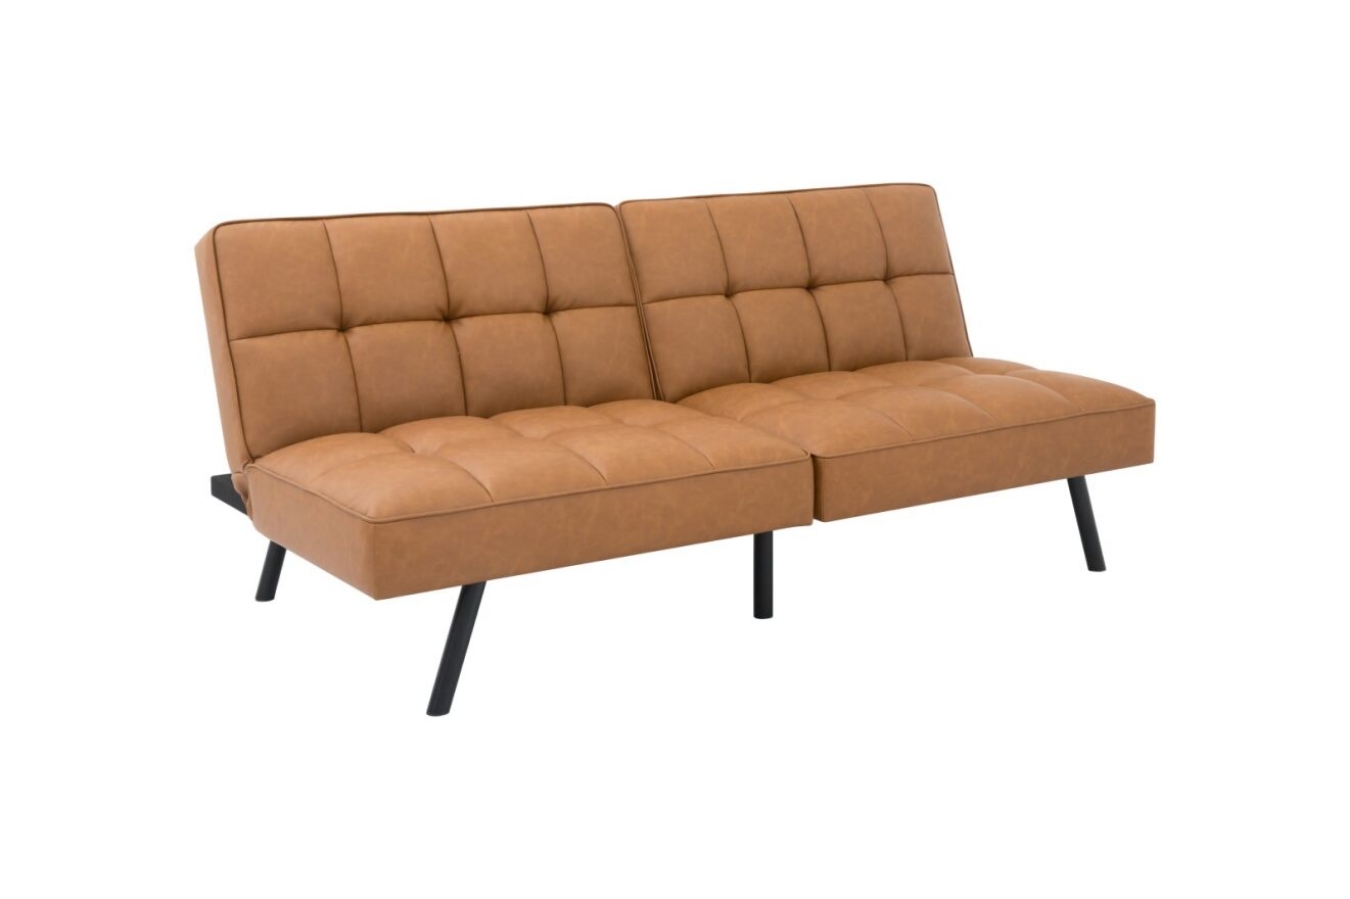 Embrace the perfect blend of style and functionality with the Ashley 3-seater futon Sofa Bed